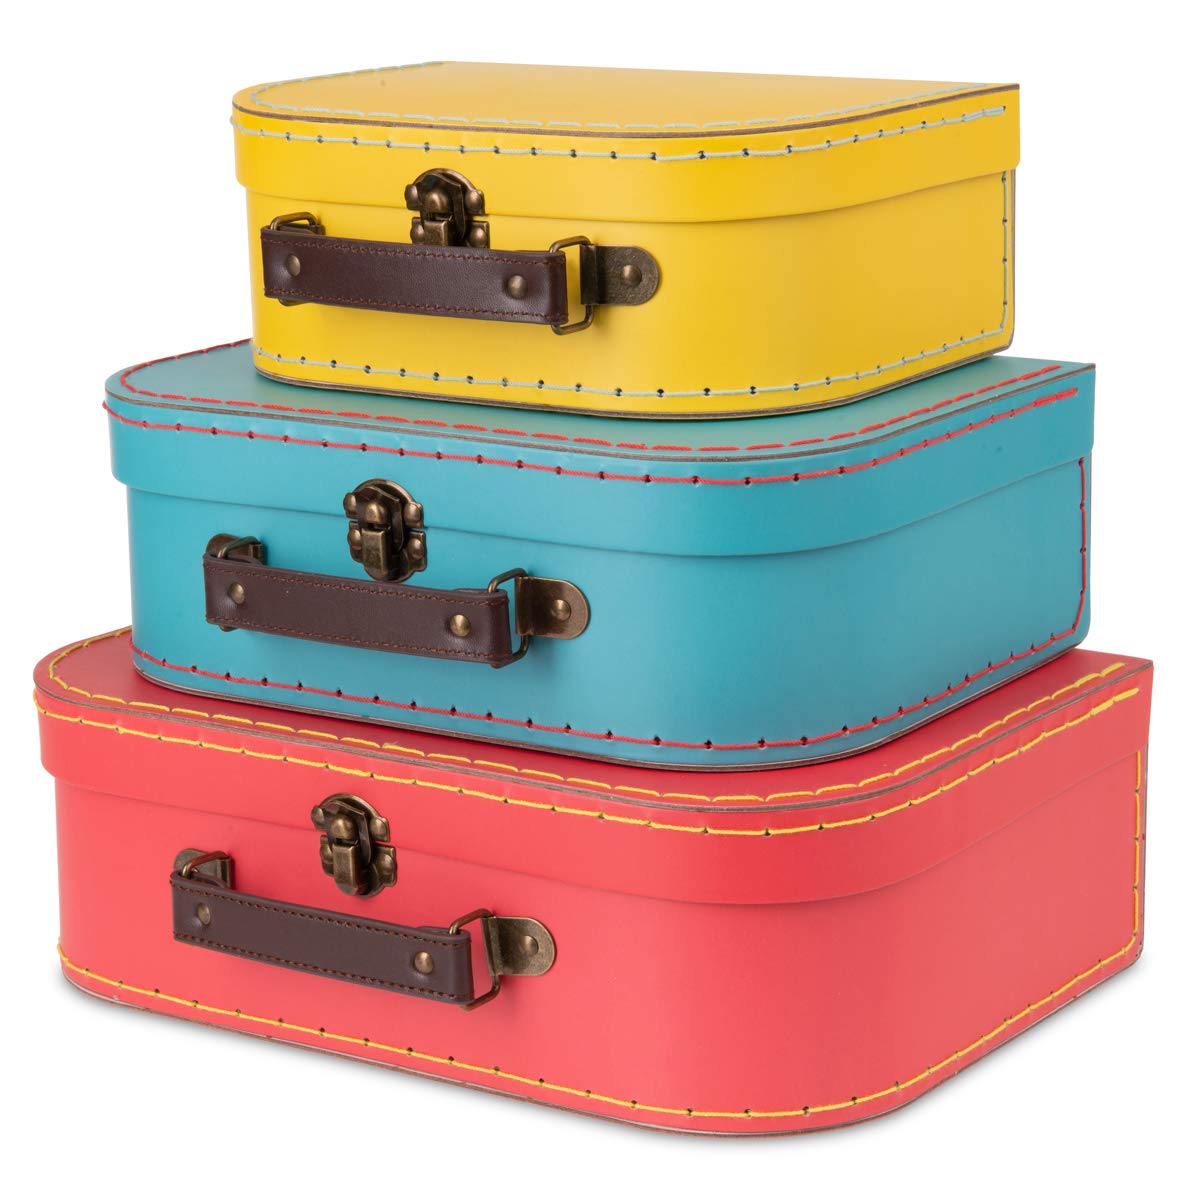 3-Count Jewelkeeper Paperboard Decorative Vintage Storage Cardboard Suitcase $17.50 + Free Shipping w/ Prime or on $25+